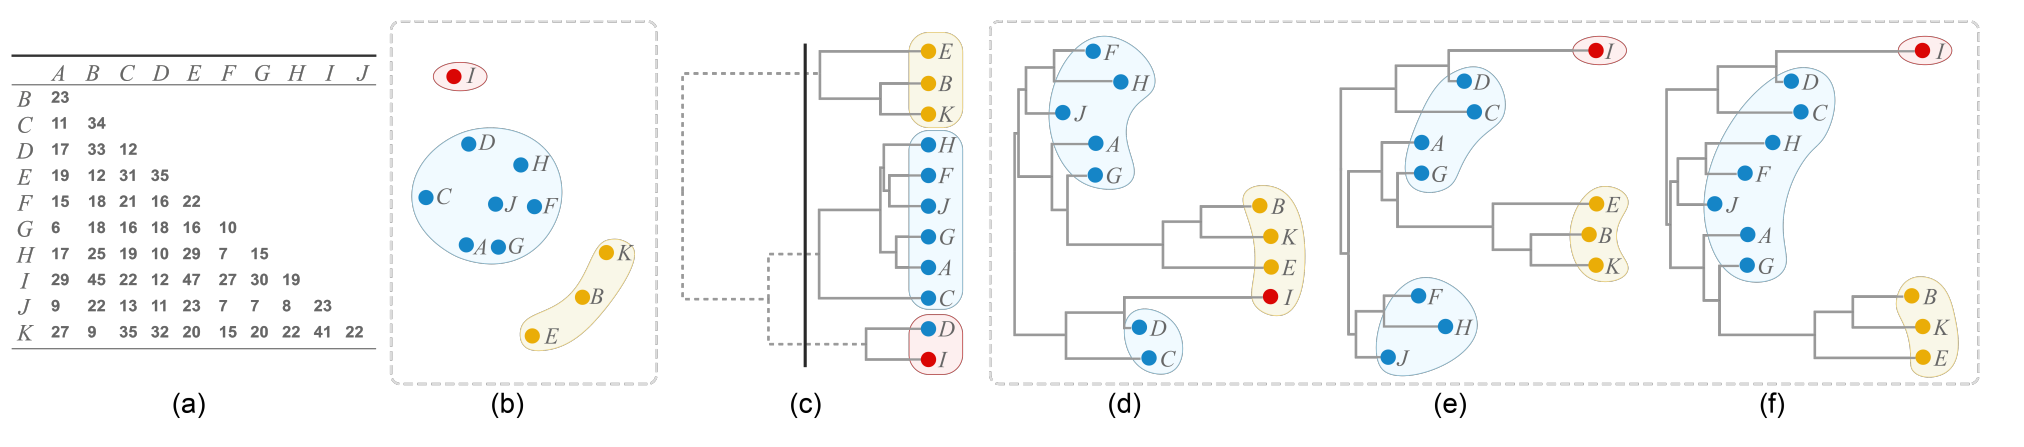 Teaser of Optimally Ordered Orthogonal Neighbor Joining Trees for Hierarchical Cluster Analysis